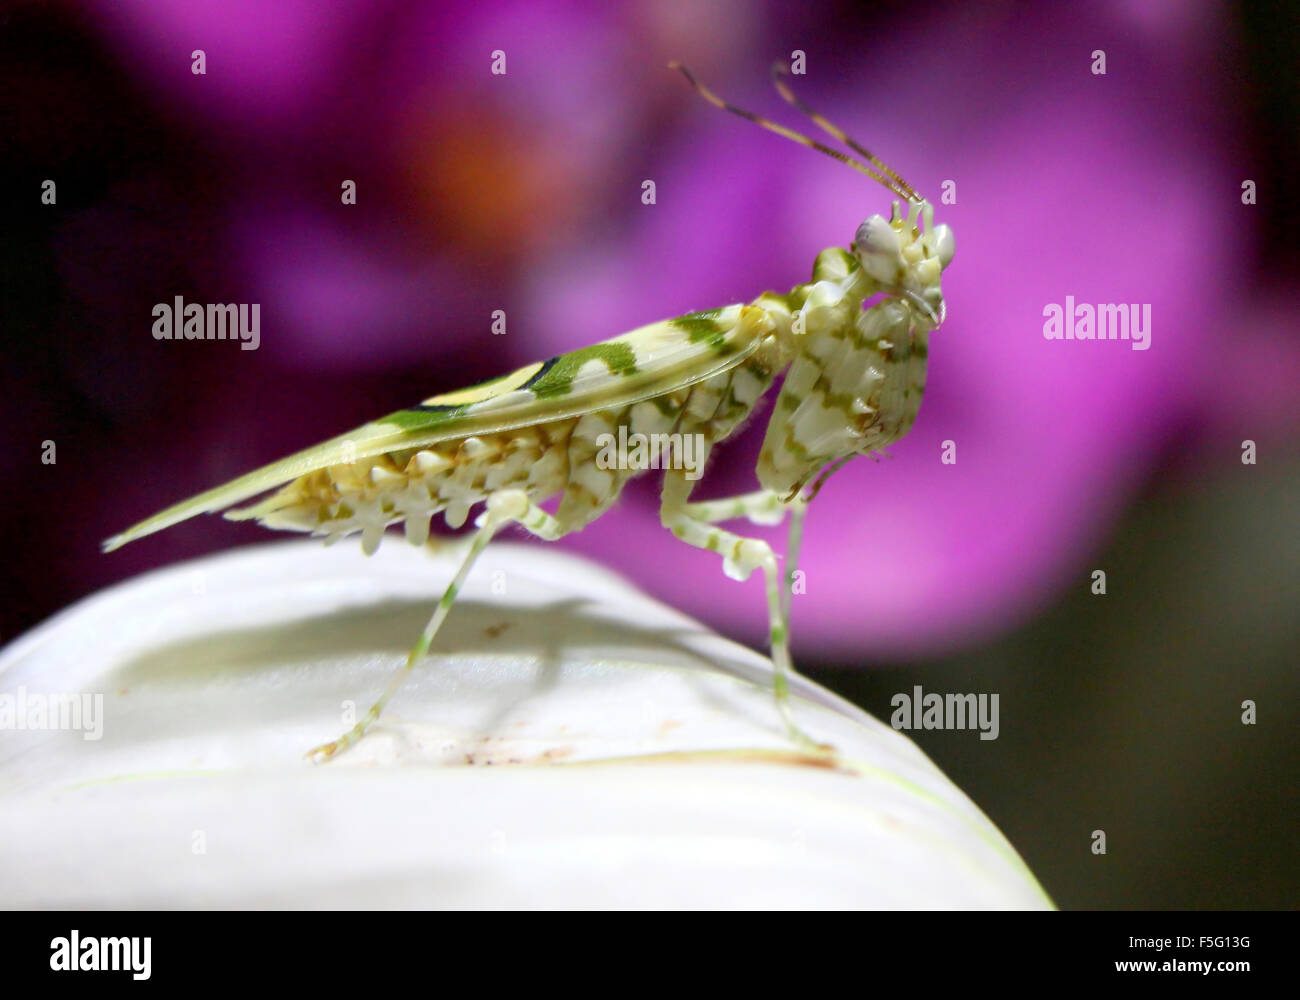 East African Spiny flower mantis (Pseudocreobotra wahlbergi) posing on a flower Stock Photo